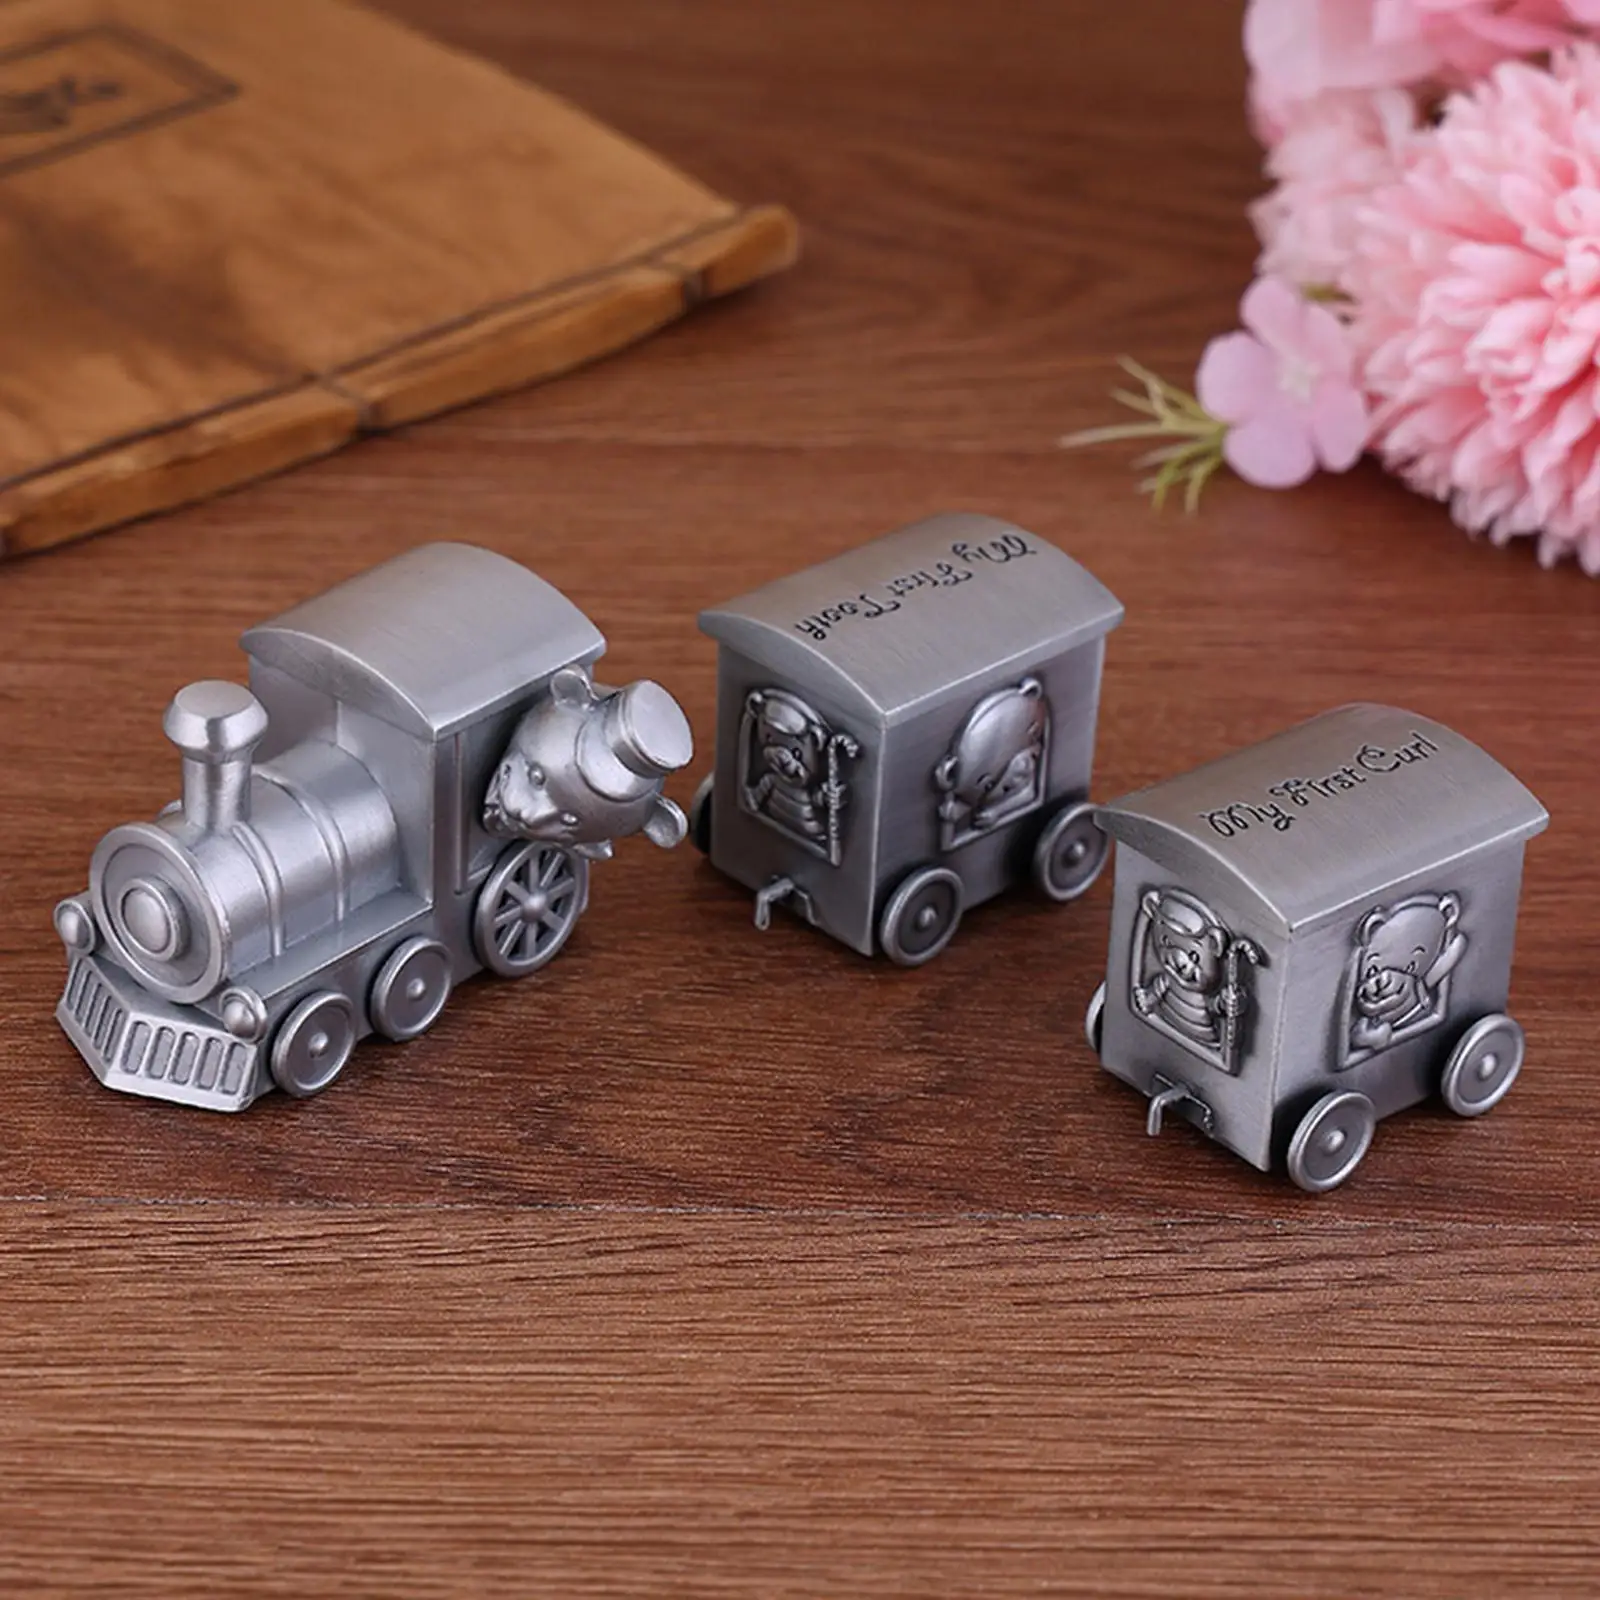 Baby Collections Box Metal Keepsakes Box for Nusery Decor Shower